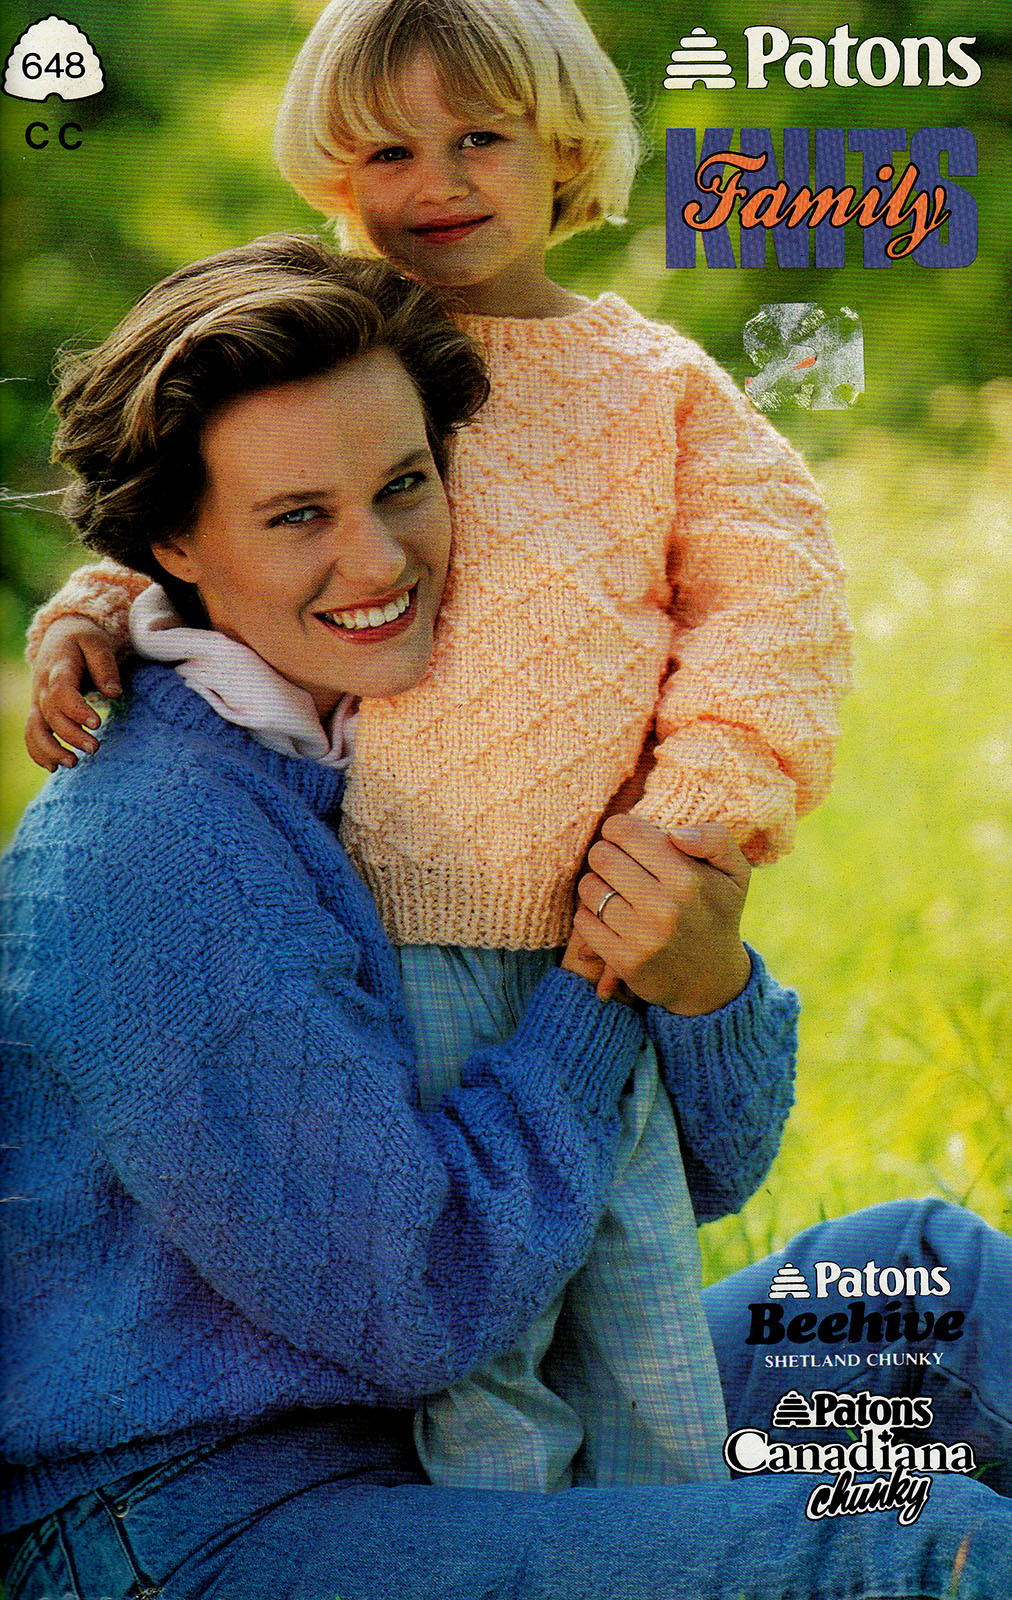 AFAMILY KNITS MOM DAD KIDS SWEATERS CARDIGANS PATONS #648 BEEHIVE CHUNKY NORSPUN - $4.98